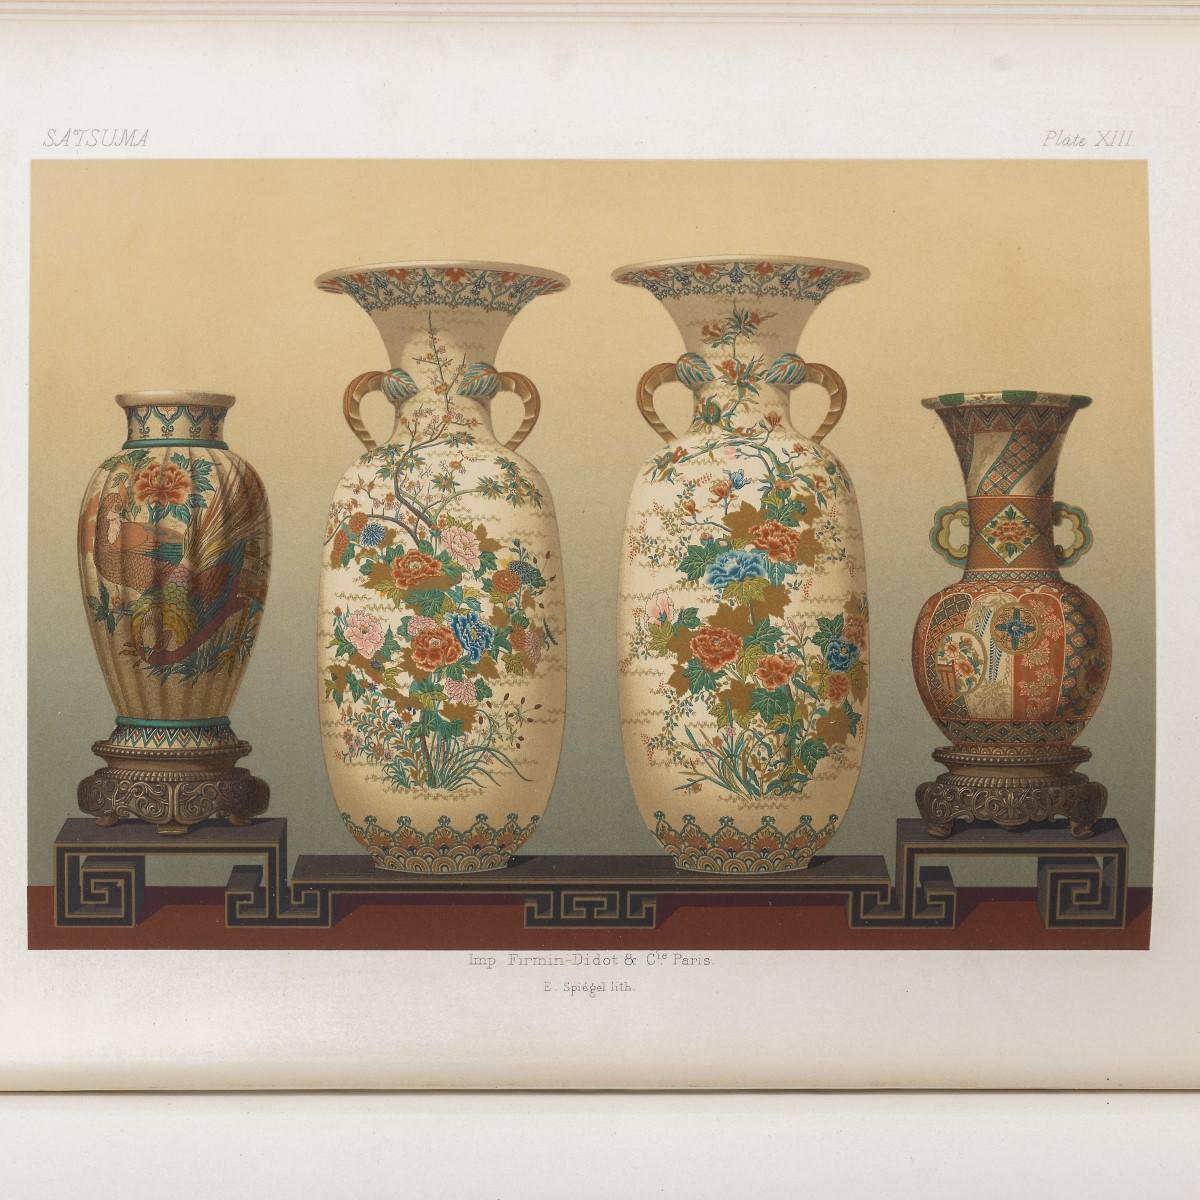 Audsley, George Ashdown and James, Lord Bowes ‘The Keramic Art of Japan’ For Sale 2